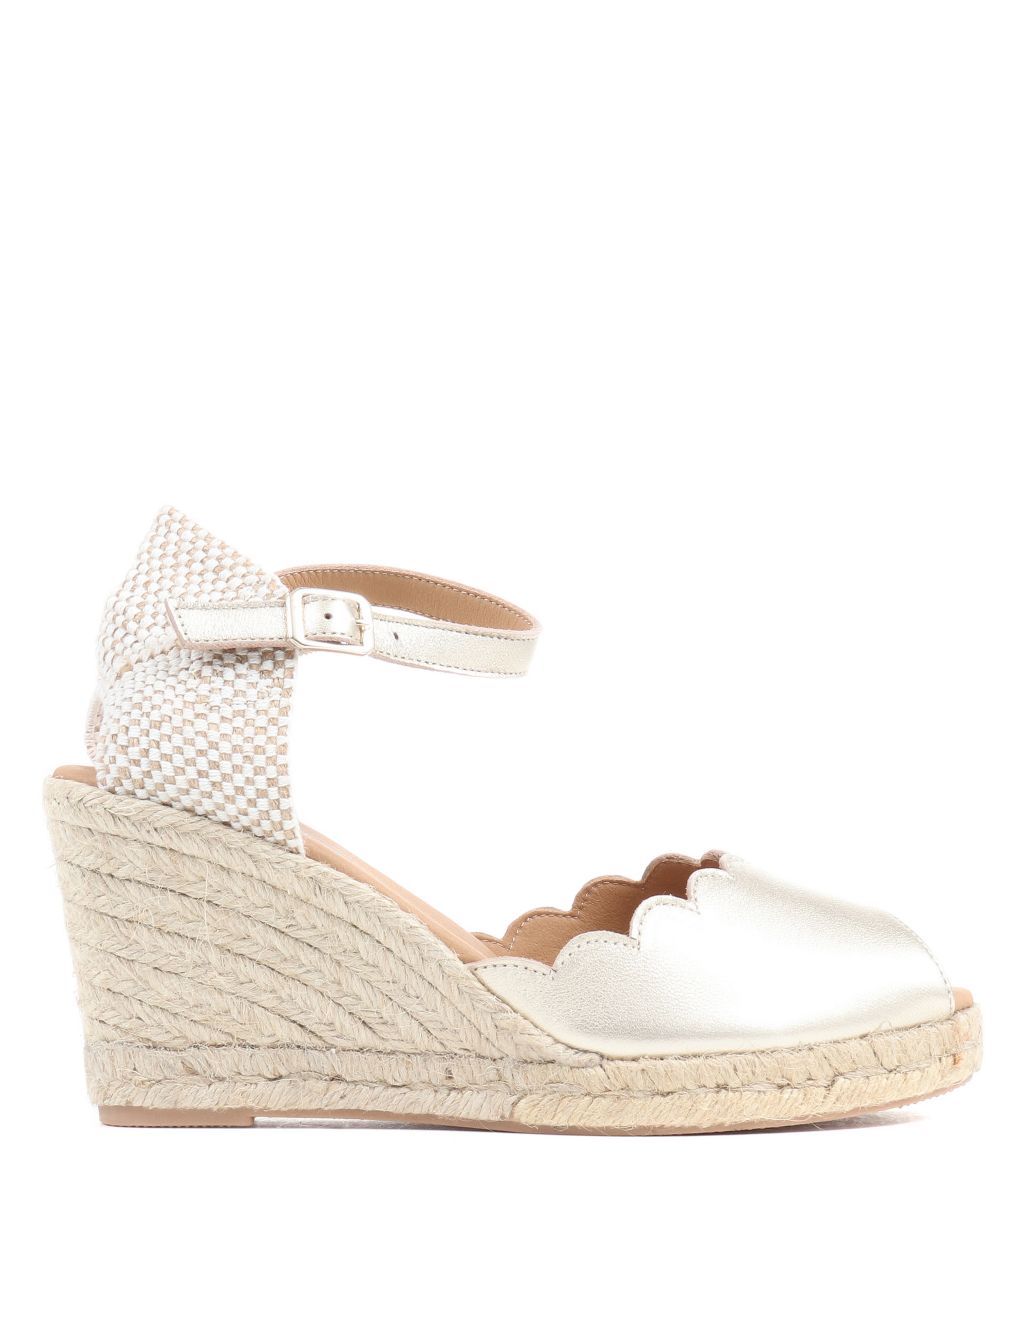 Leather Ankle Strap Wedge Espadrilles image 4